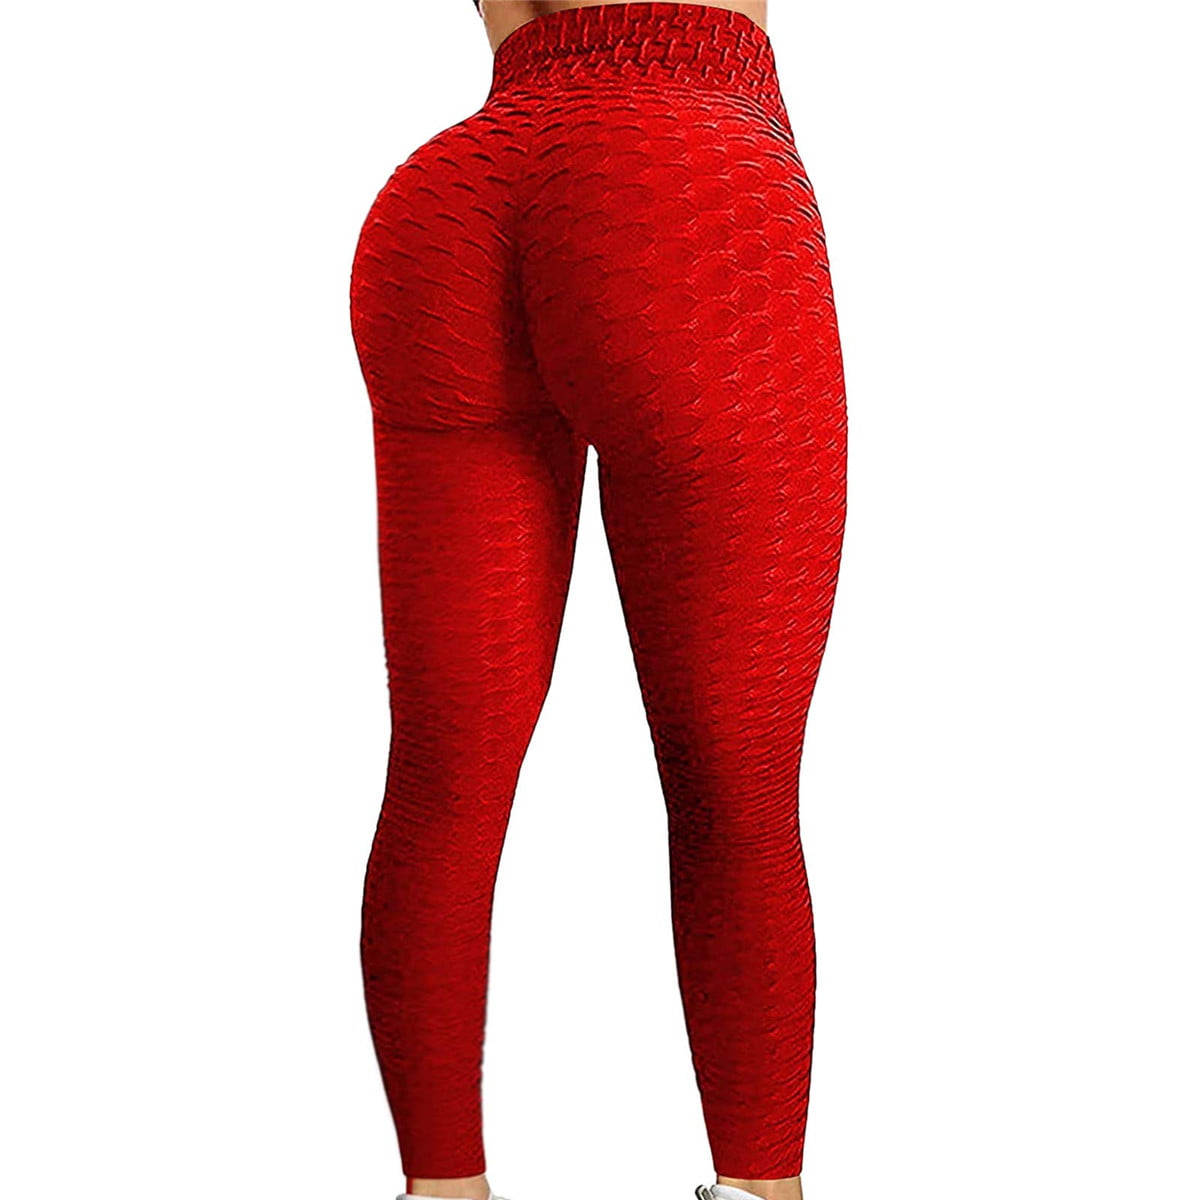 Workout Ruched Butt Lift Leggings for Women High Waisted Scrunch Cellulite Booty Yoga Pants Fishnet Tights TIK Tok 